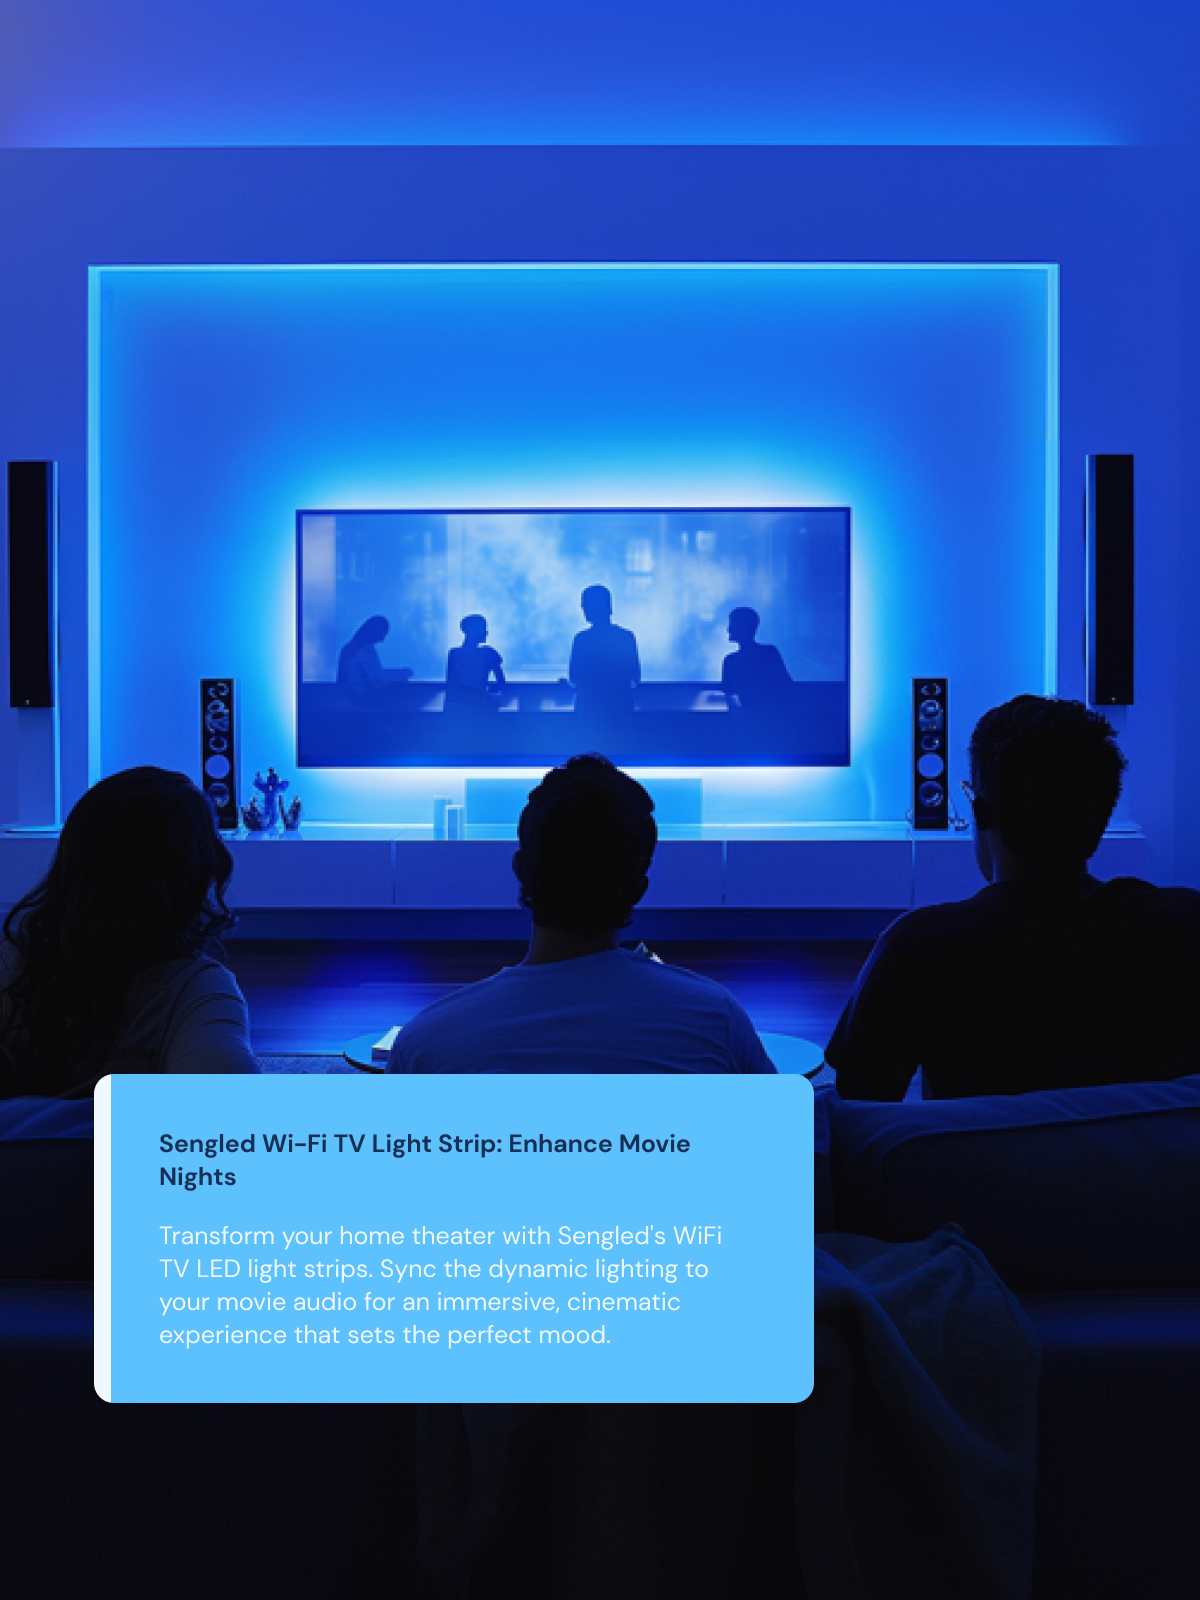 Enhance Movie Nights Transform your home theater with Sengled's WiFi TV LED light strips. Sync the dynamic lighting to your movie audio for an immersive, cinematic experience that sets the perfect mood.